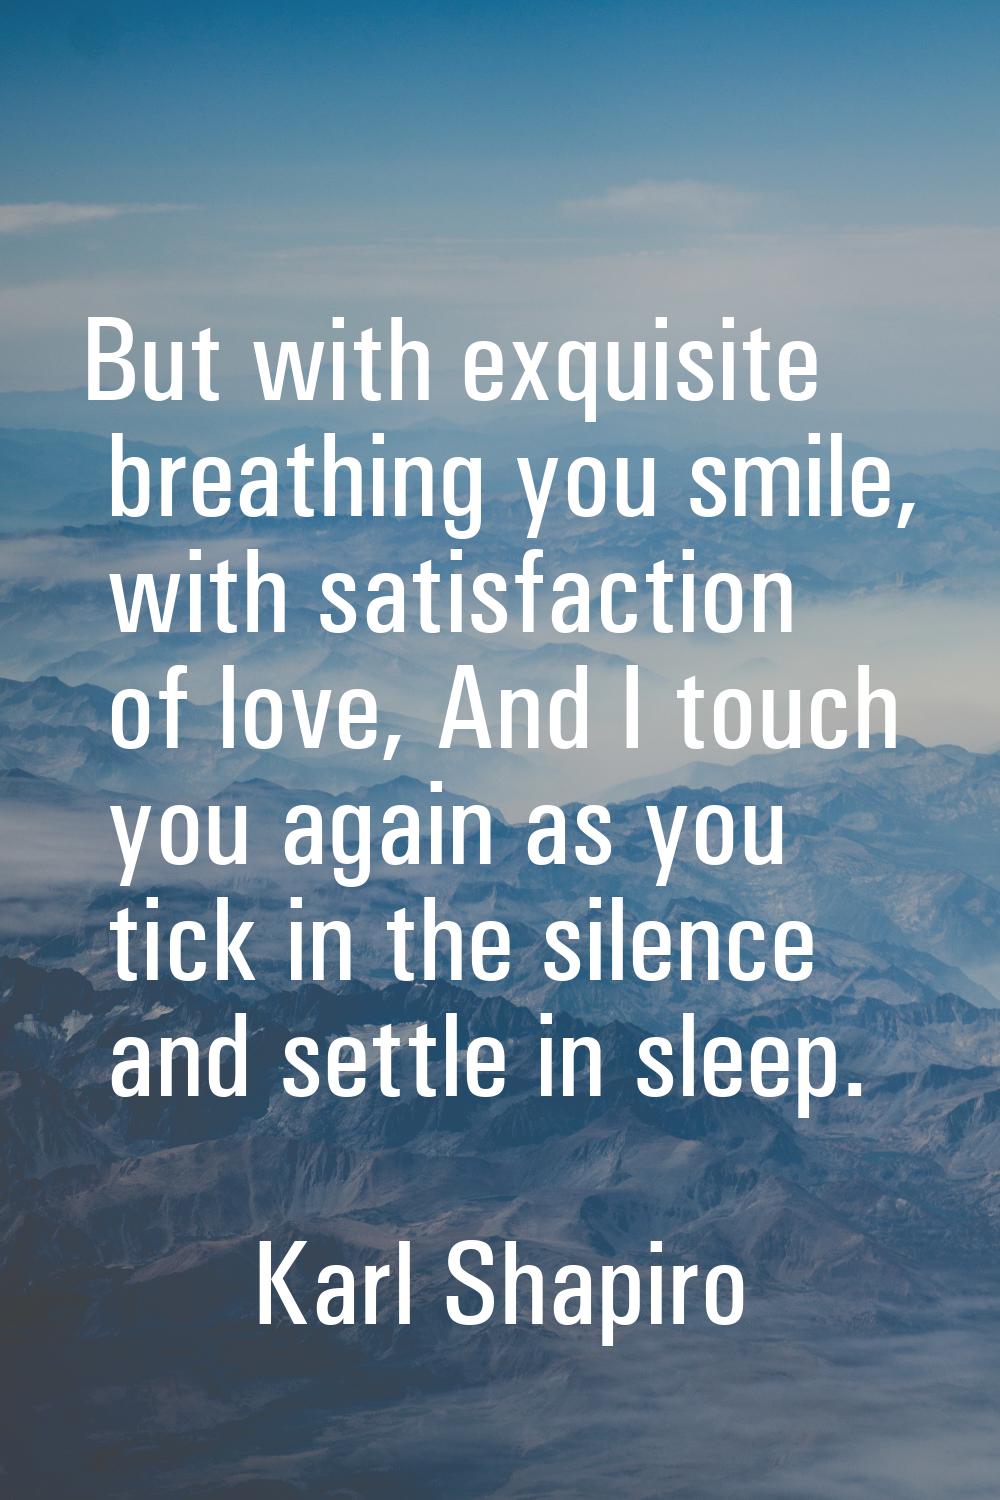 But with exquisite breathing you smile, with satisfaction of love, And I touch you again as you tic